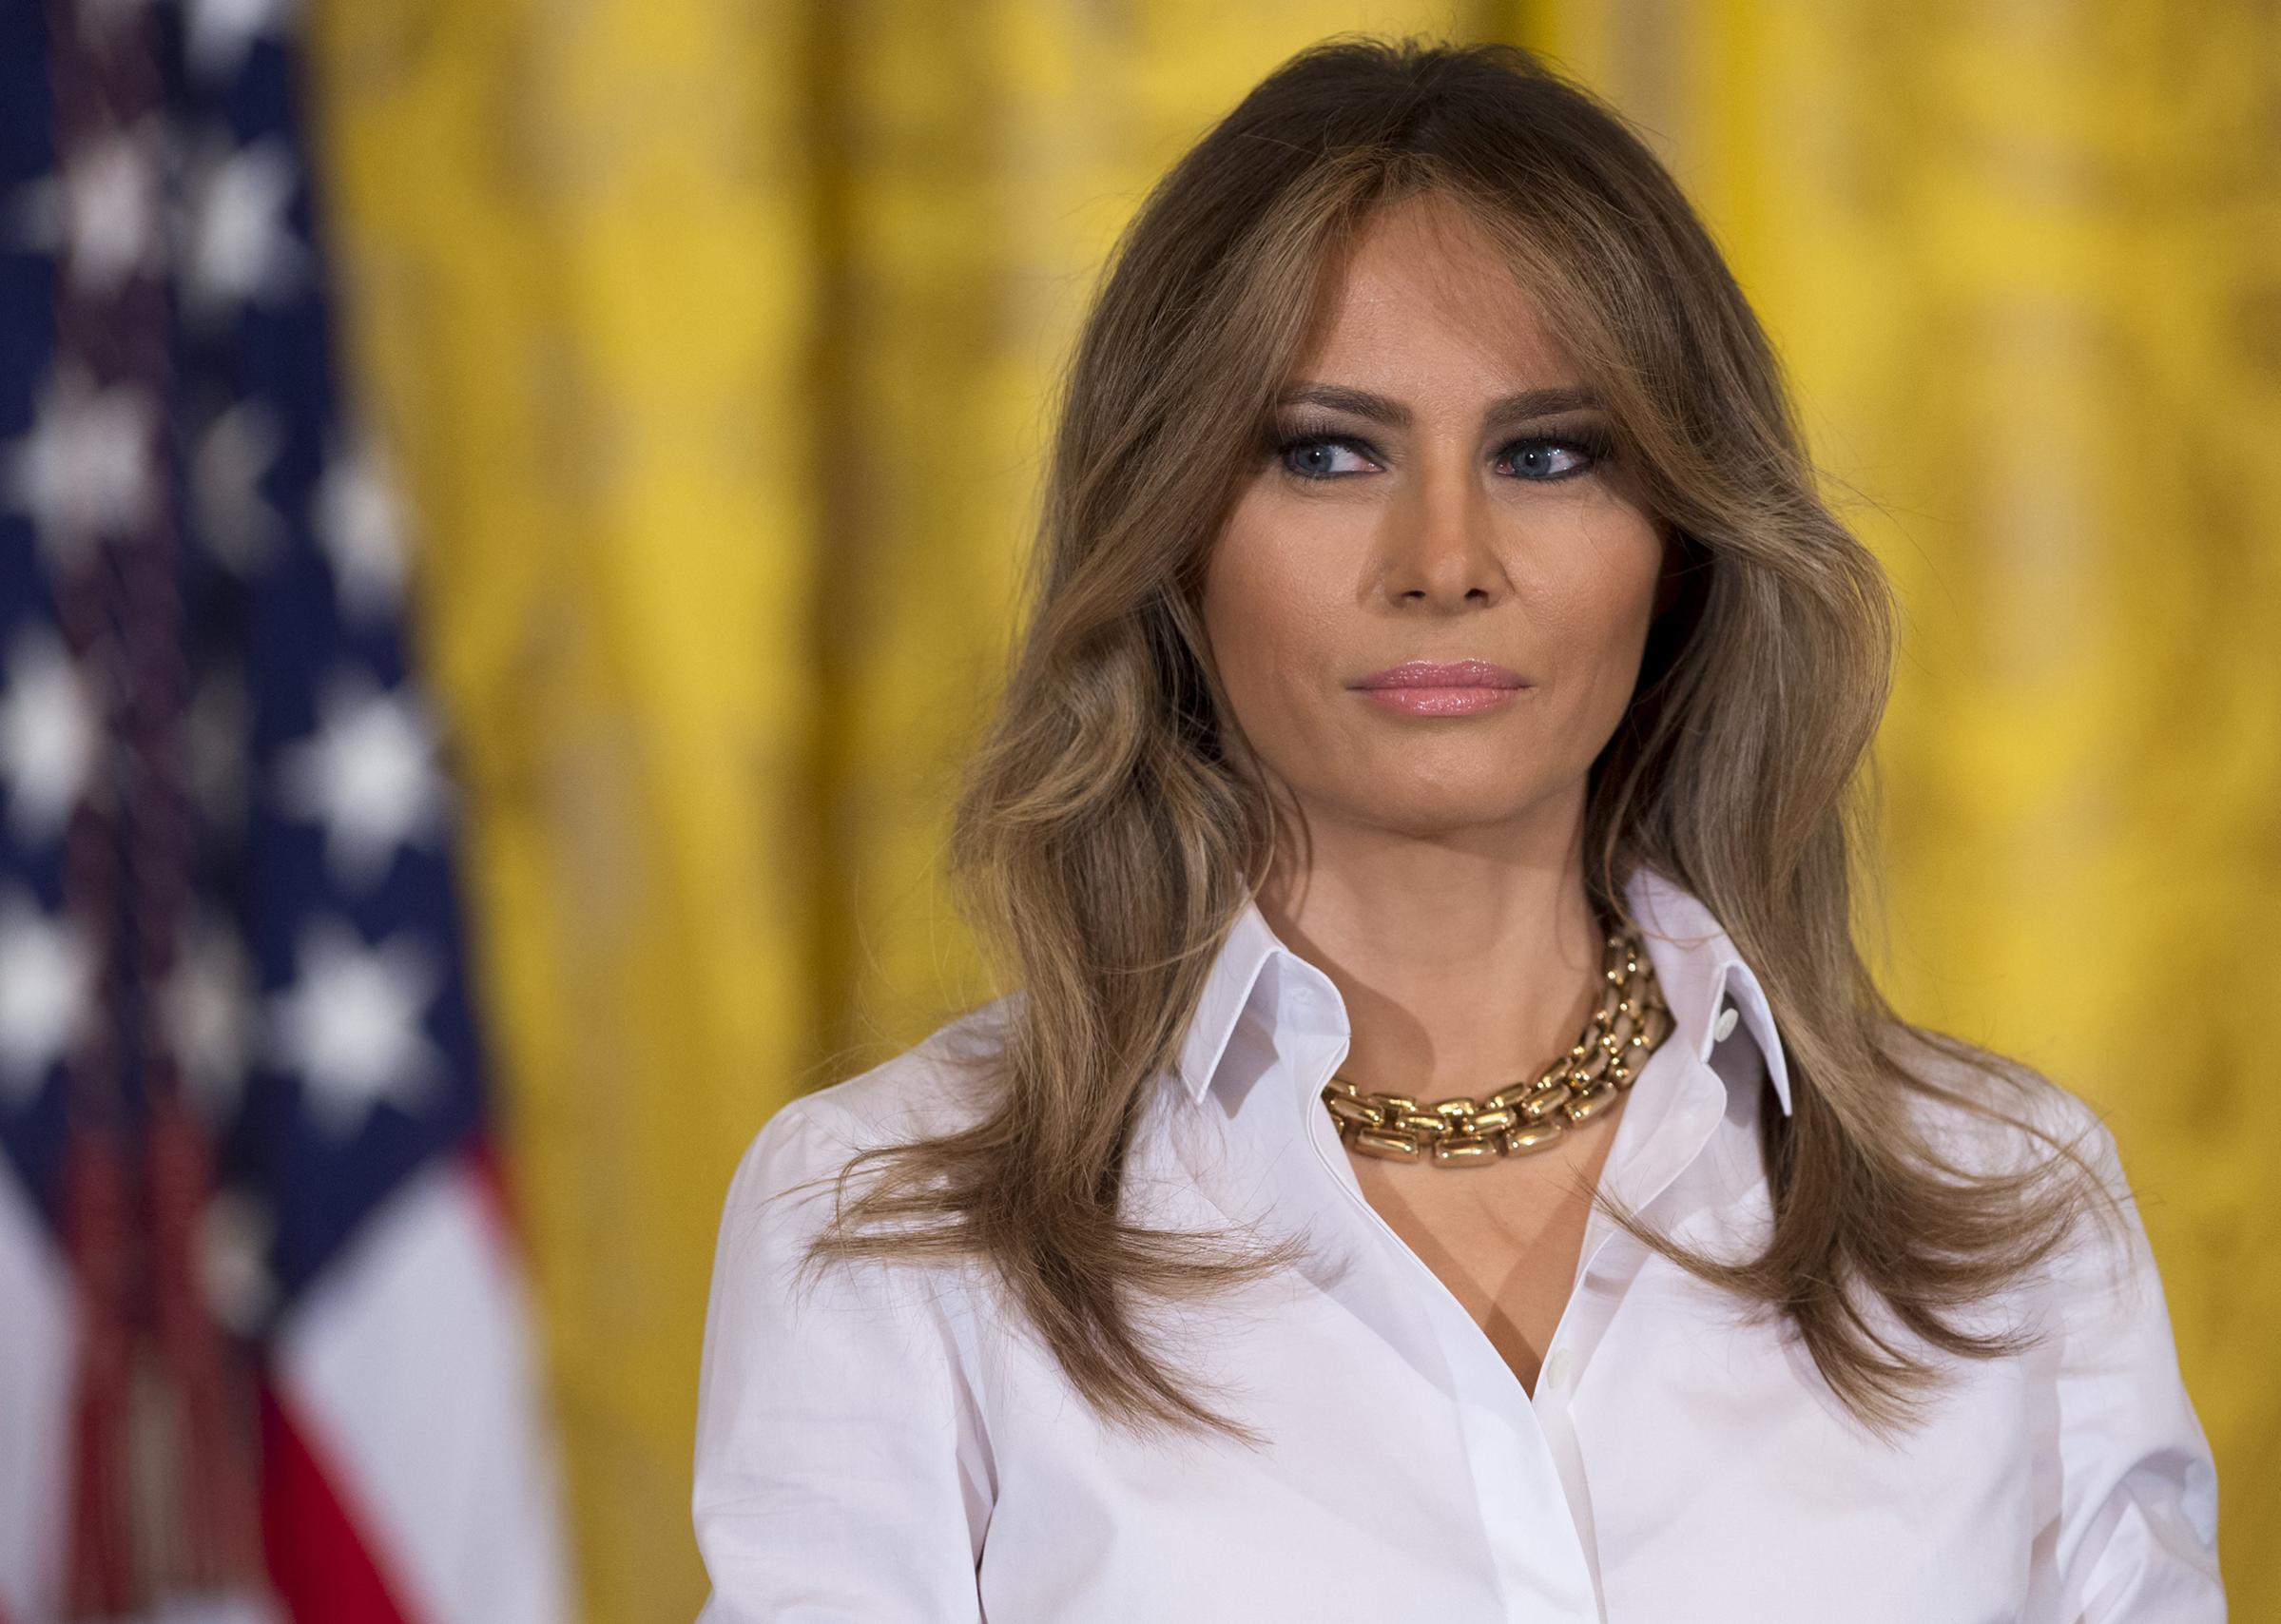 First lady Melania Trump wearing chunky, chain-link gold necklace, speaks during a Mother's Day event for military spouses in the East Room of the White House in Washington, DC, May 12, 2017.